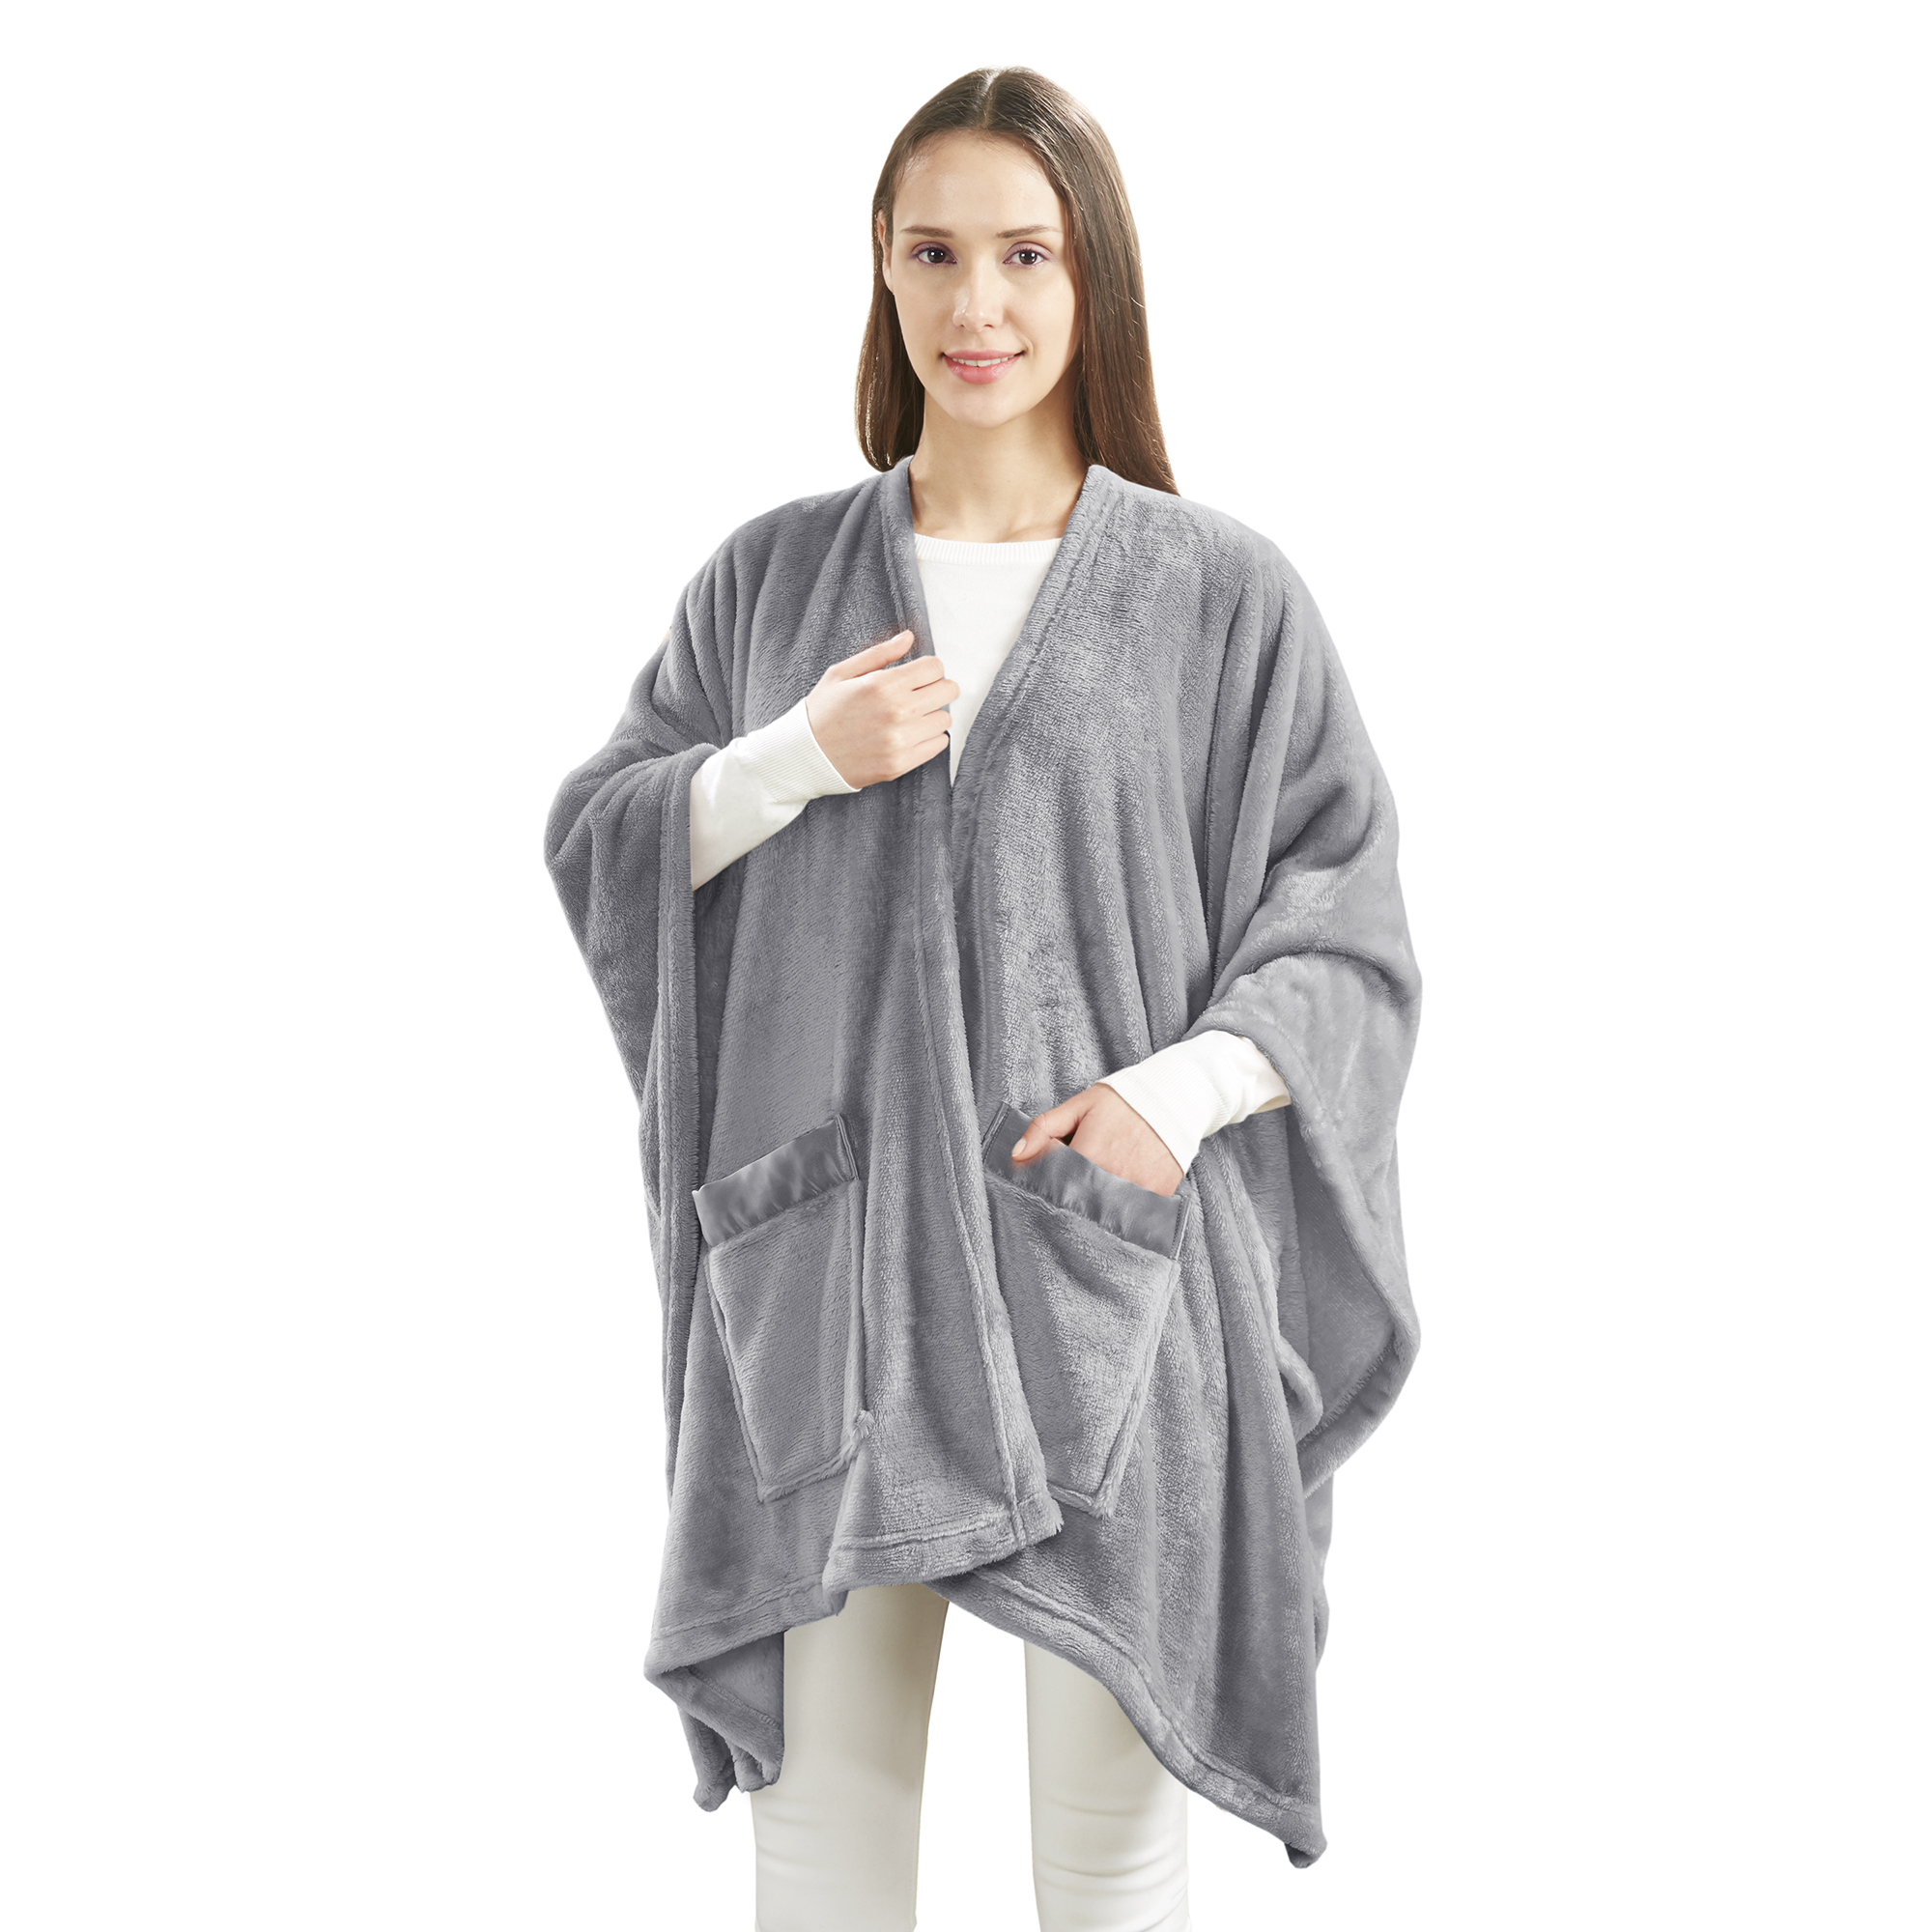 Giftable and Wearable Angel Wrap Plush Throw Blanket with Pockets, Gray - image 2 of 5